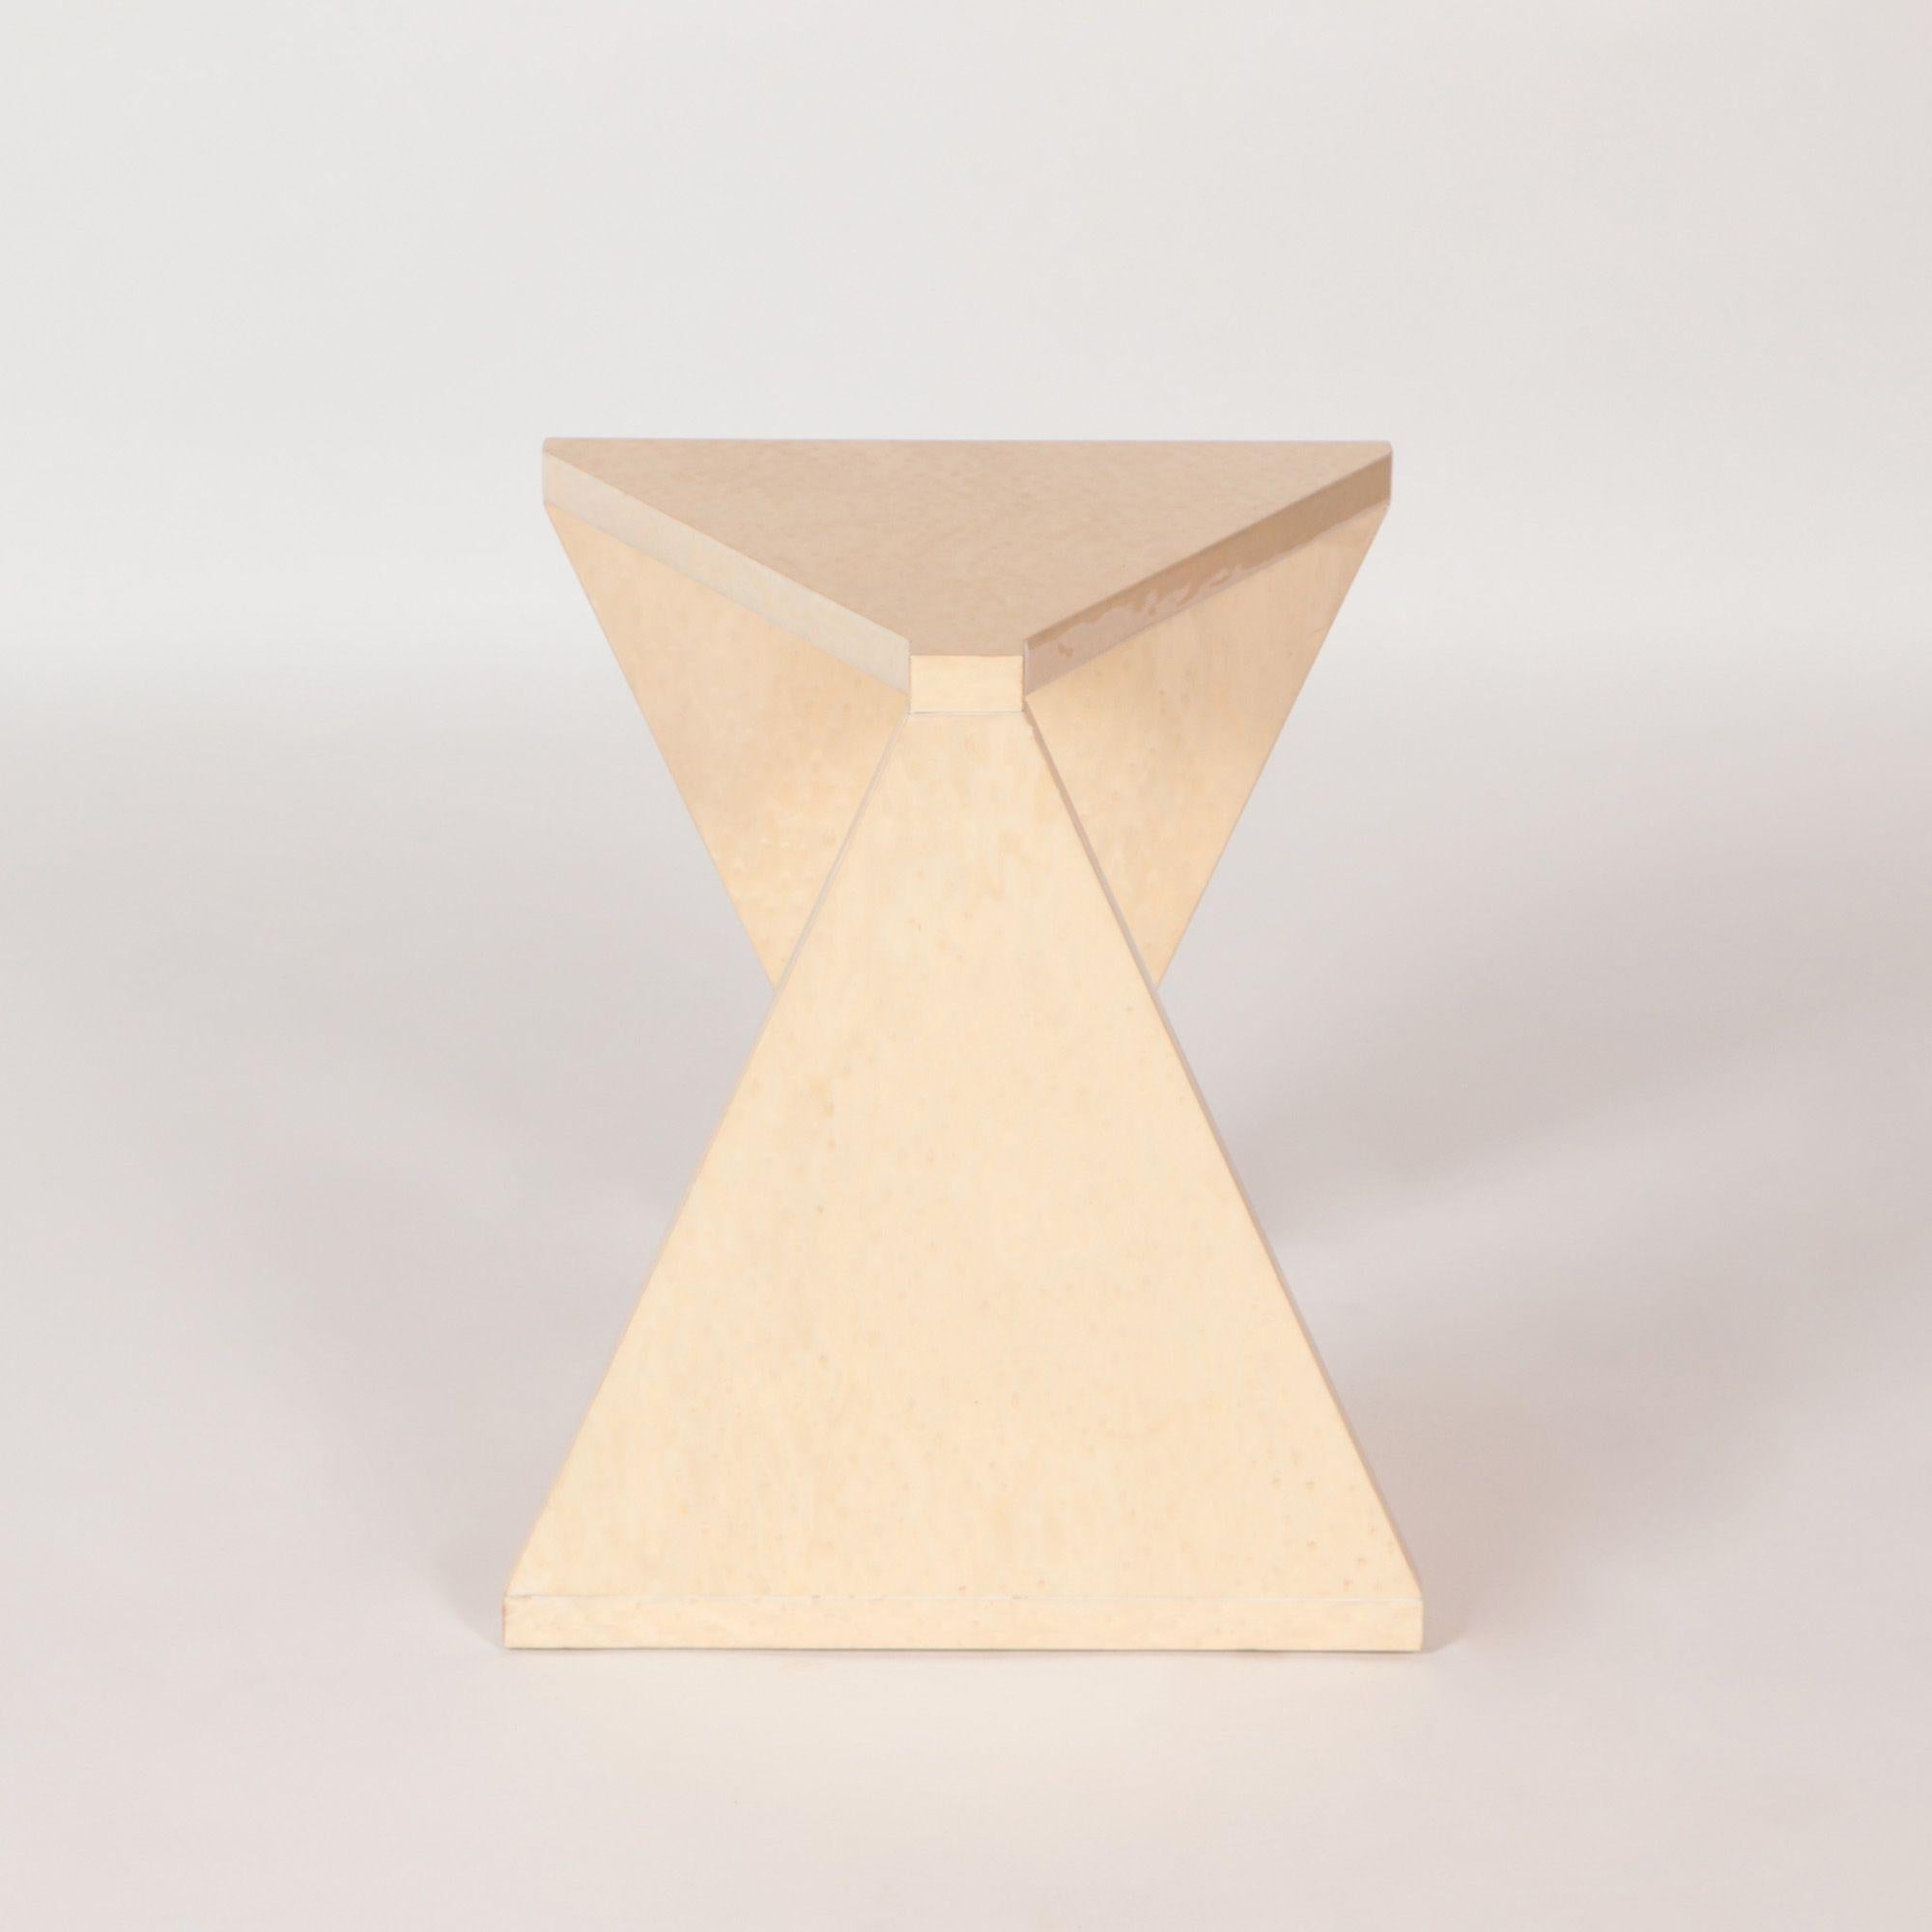 Designed by Maximilian Eicke for his brand Max ID NY.

This minimalistic side table and stool completed with a beautiful Birdseye Maple Veneer. Giving it a beautiful ivory/cream shade.

Designed as part of its original collection in 2010 the